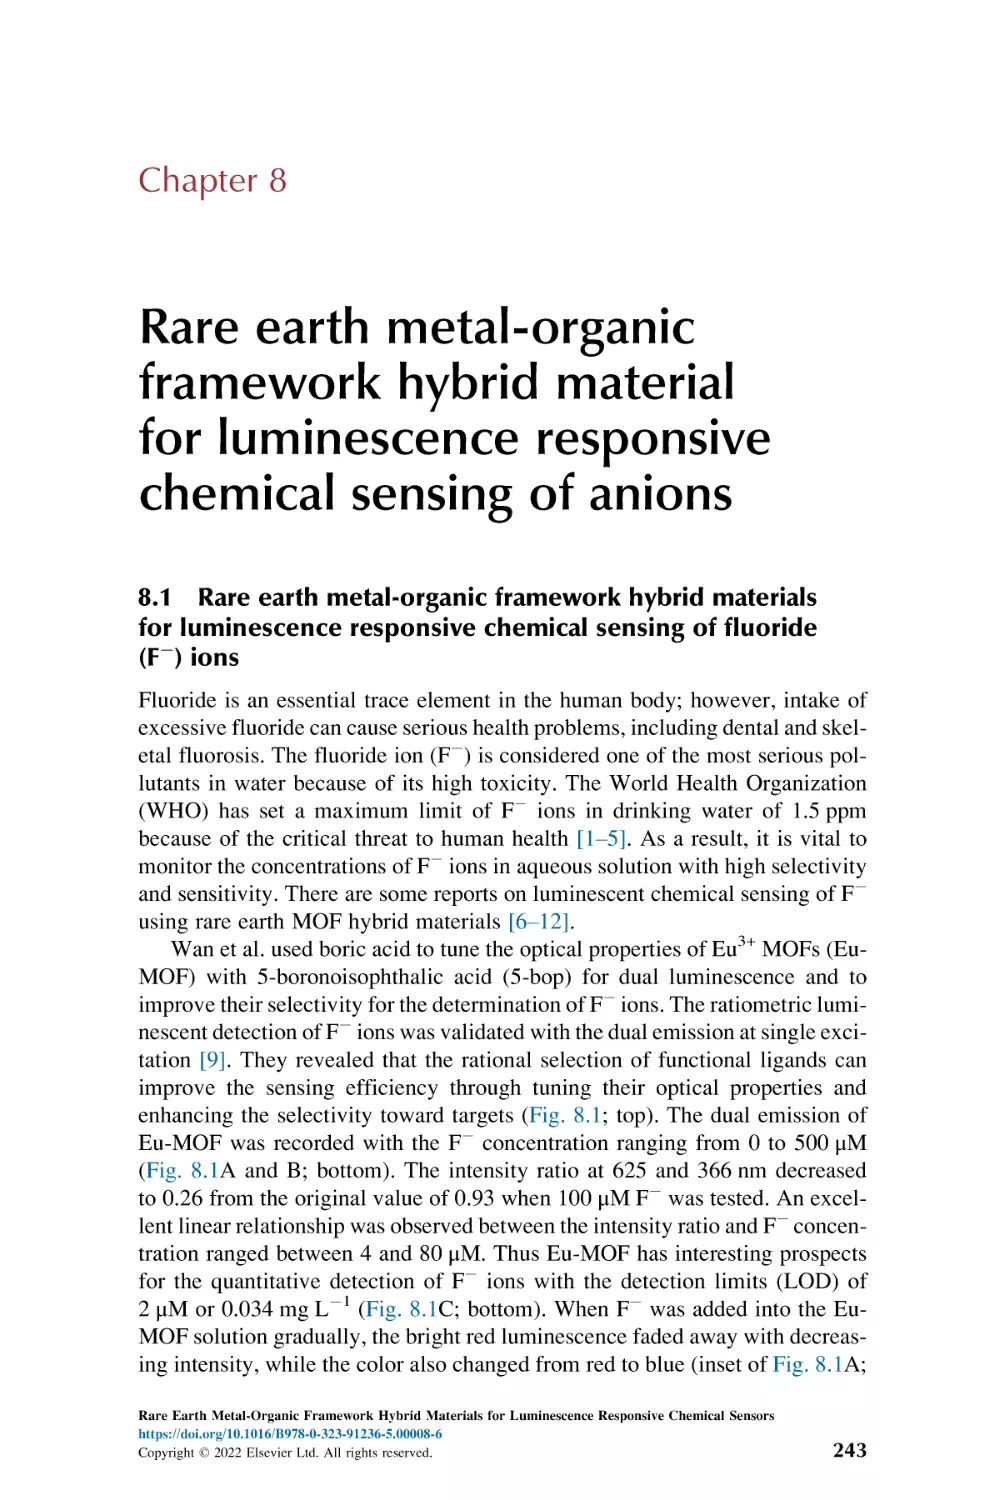 Chapter 8
8.1. Rare earth metal-organic framework hybrid materials for luminescence responsive chemical sensing of fluoride (F-) ions